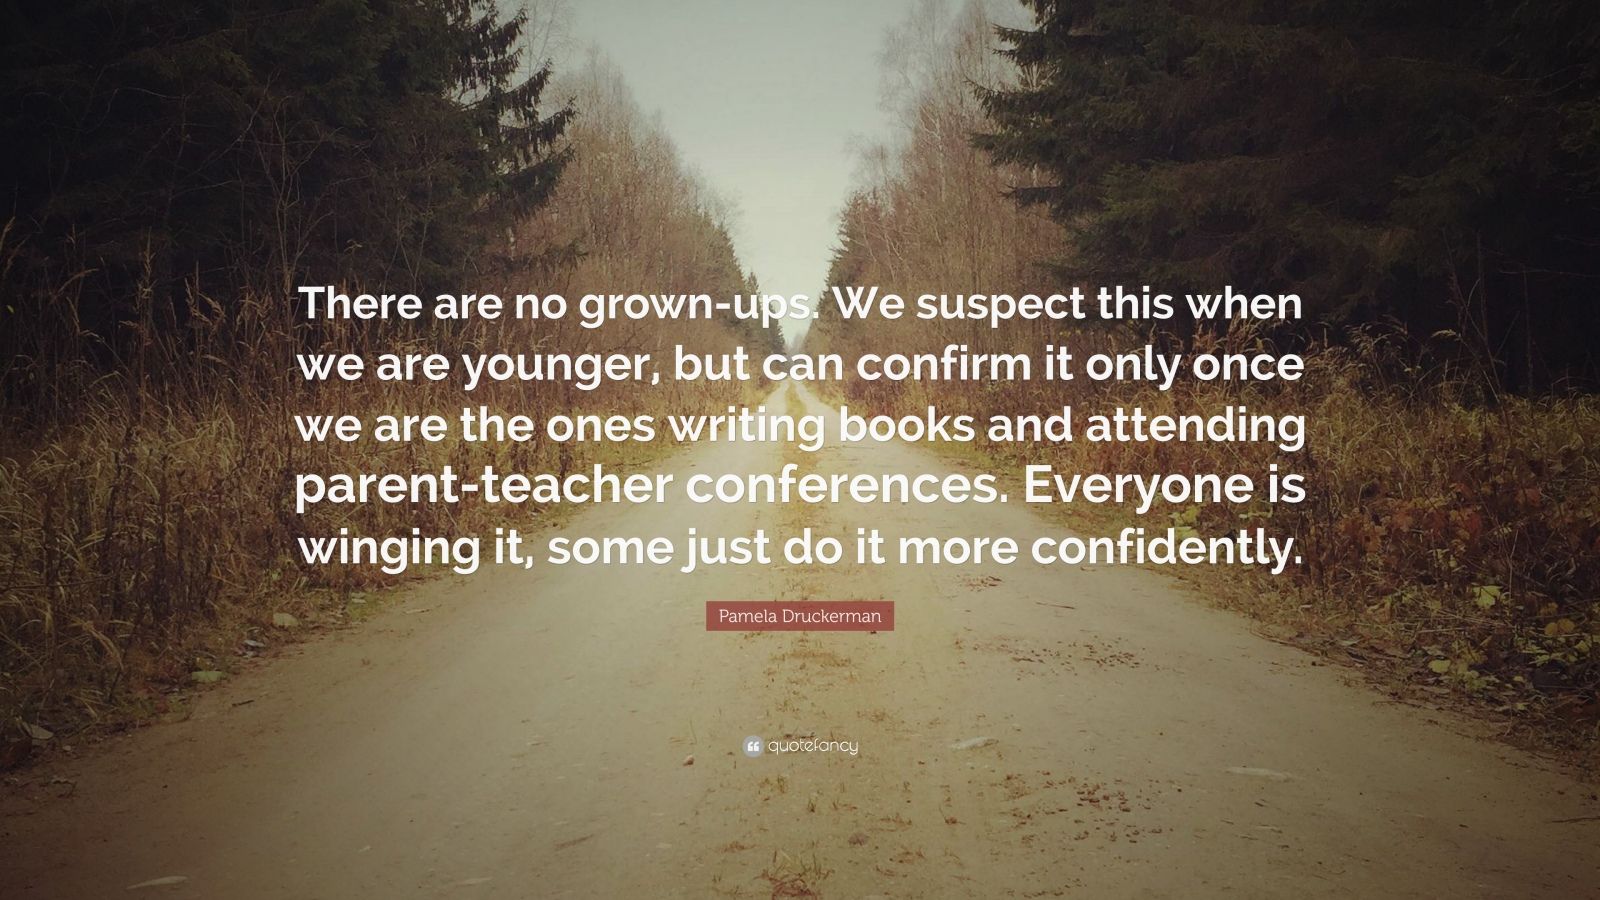 Pamela Druckerman Quote: “There are no grown-ups. We suspect this when ...